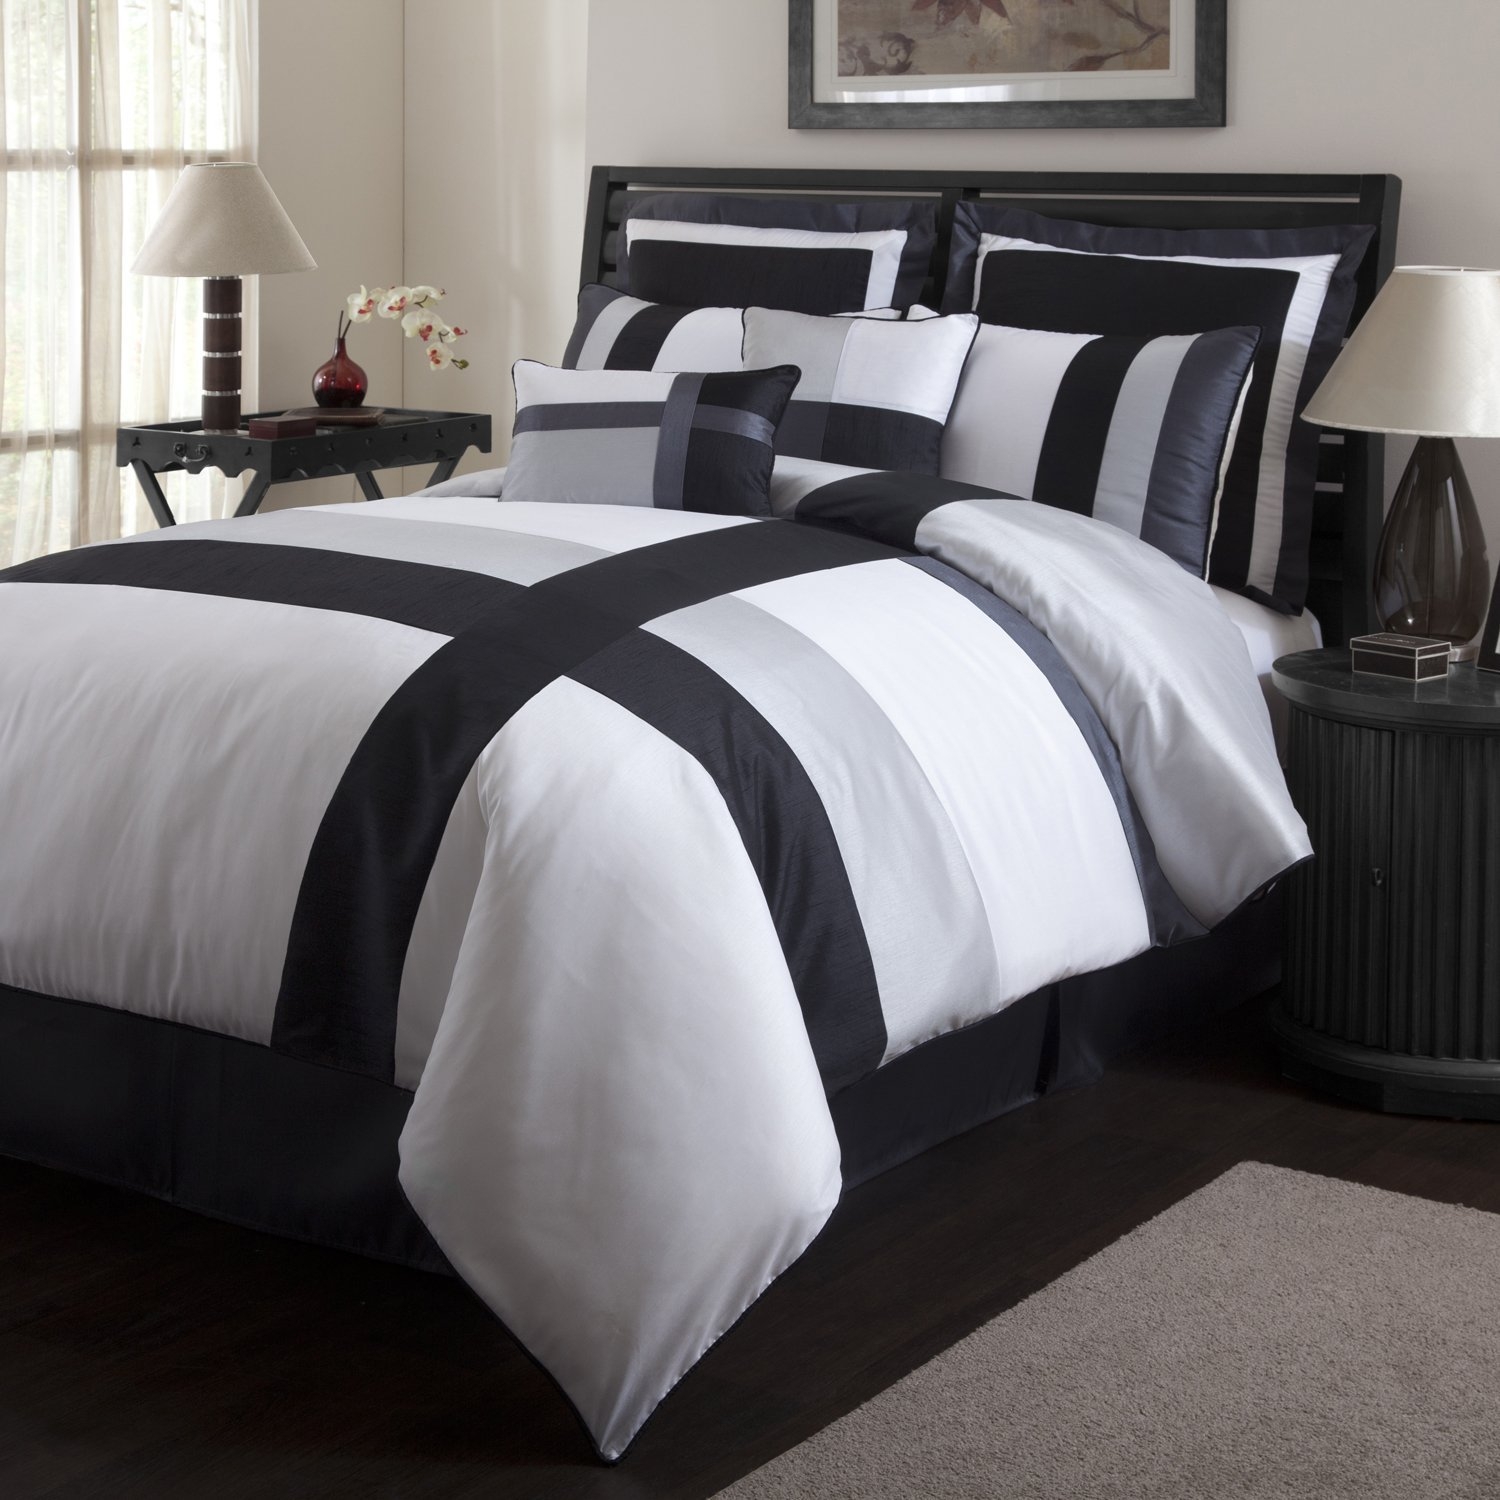 8 Pc. Faux Silk Bella Comforter Set with Black, White and Grey Stripes Queen Size